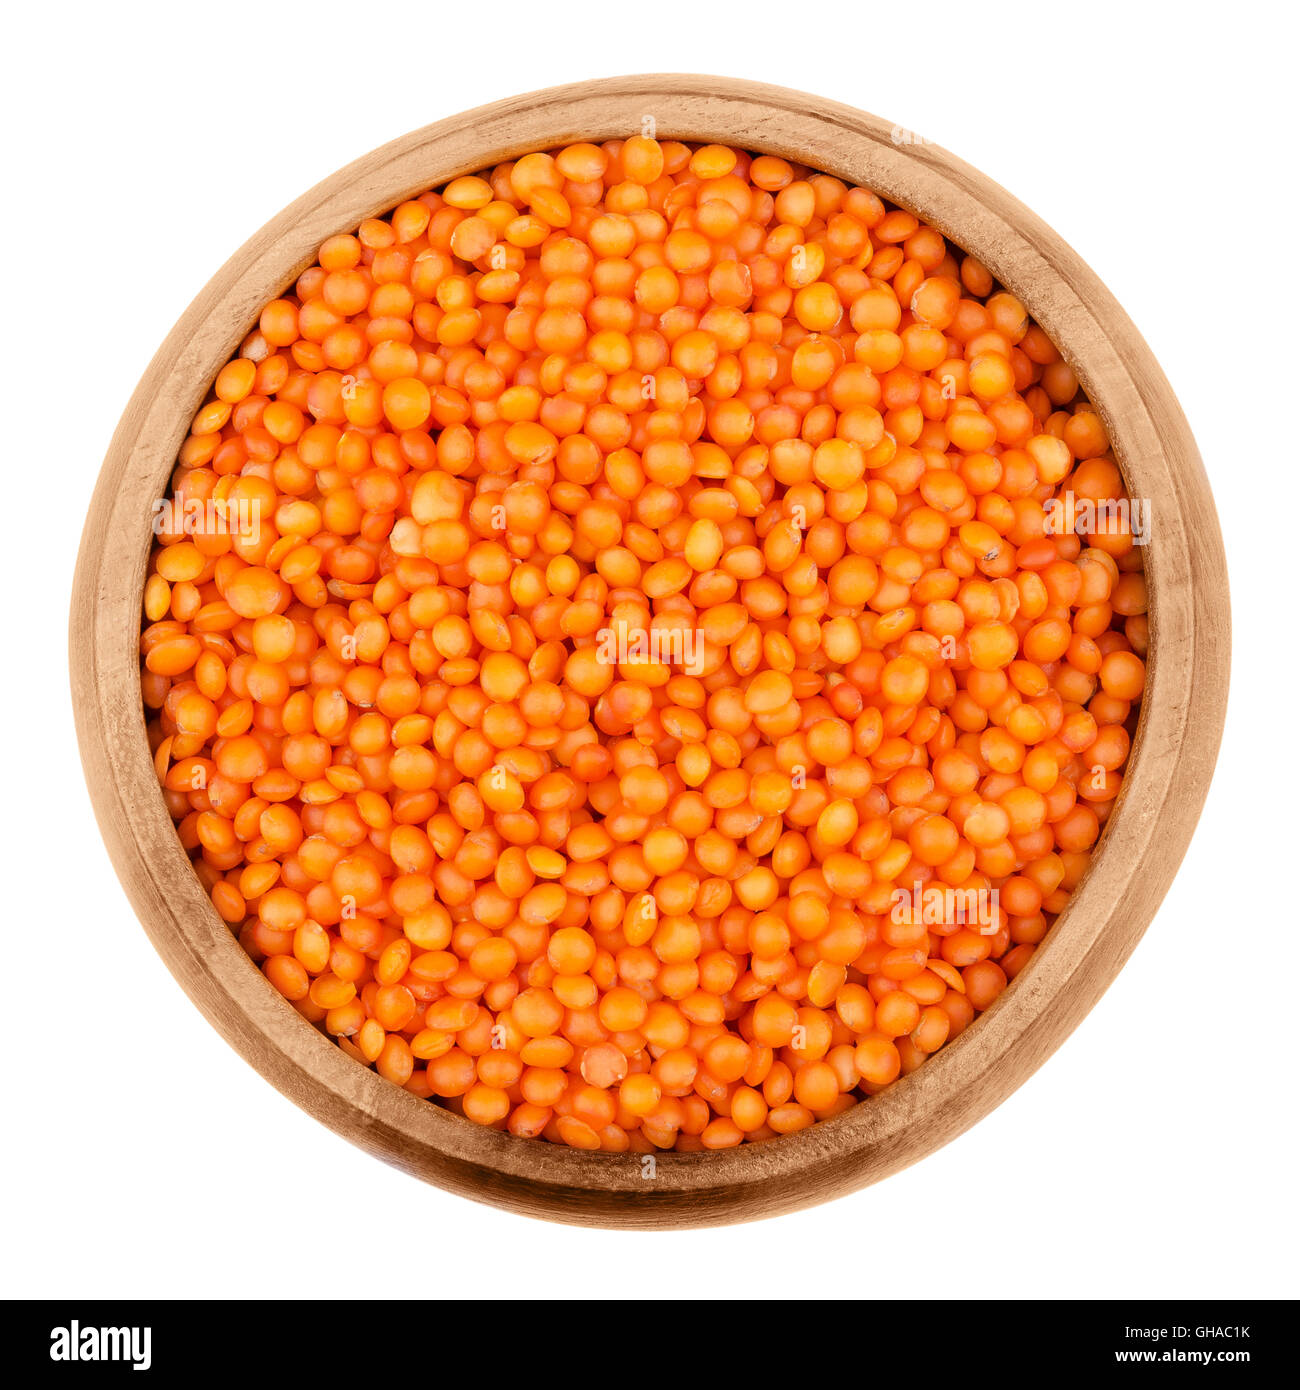 Red lentils in a wooden bowl on white background. Seeds of Lens culinaris, edible raw pulses of the legume family. Stock Photo